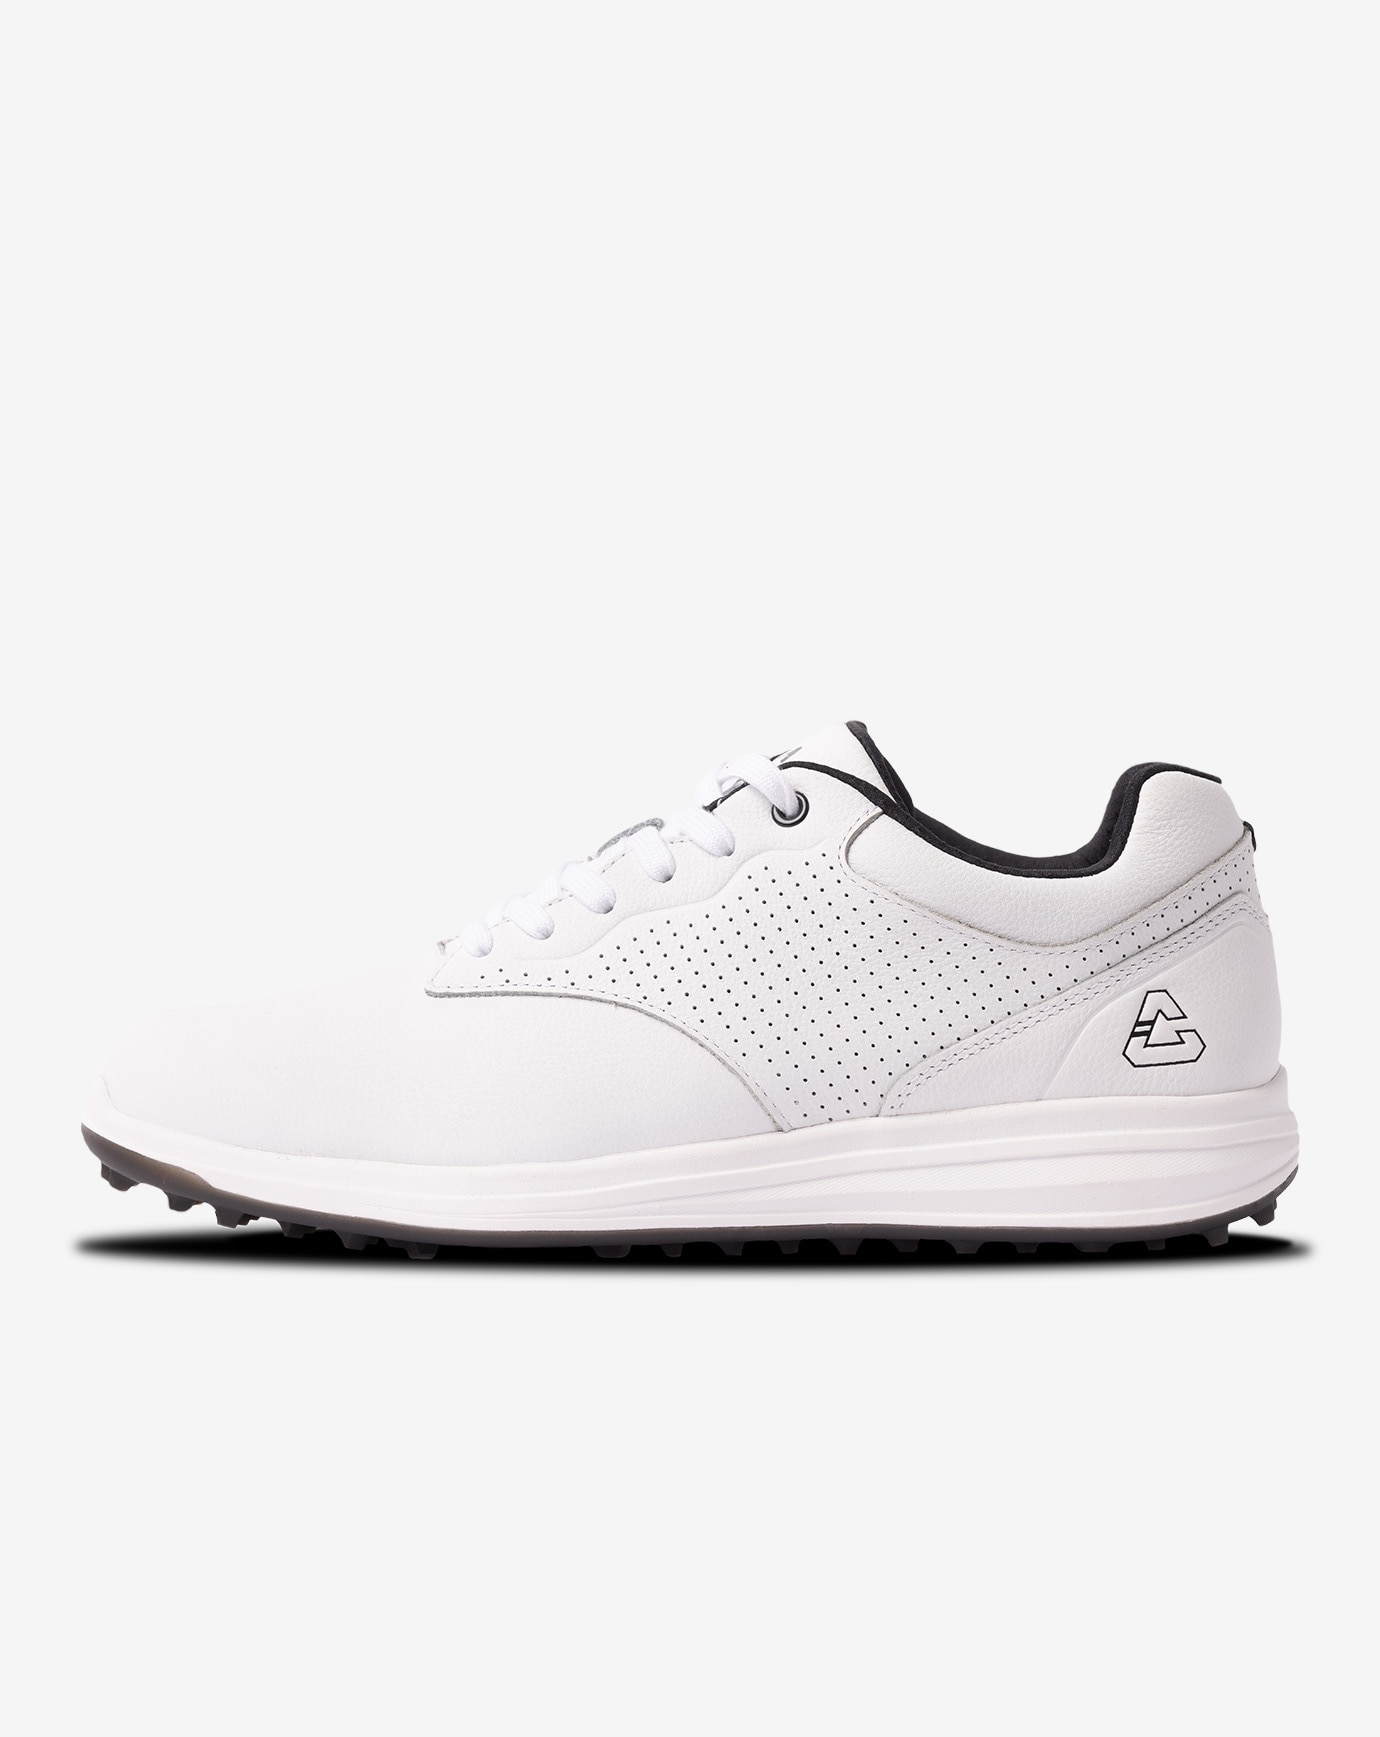 THE MONEYMAKER LUX SPIKELESS GOLF SHOE Image Thumbnail 1